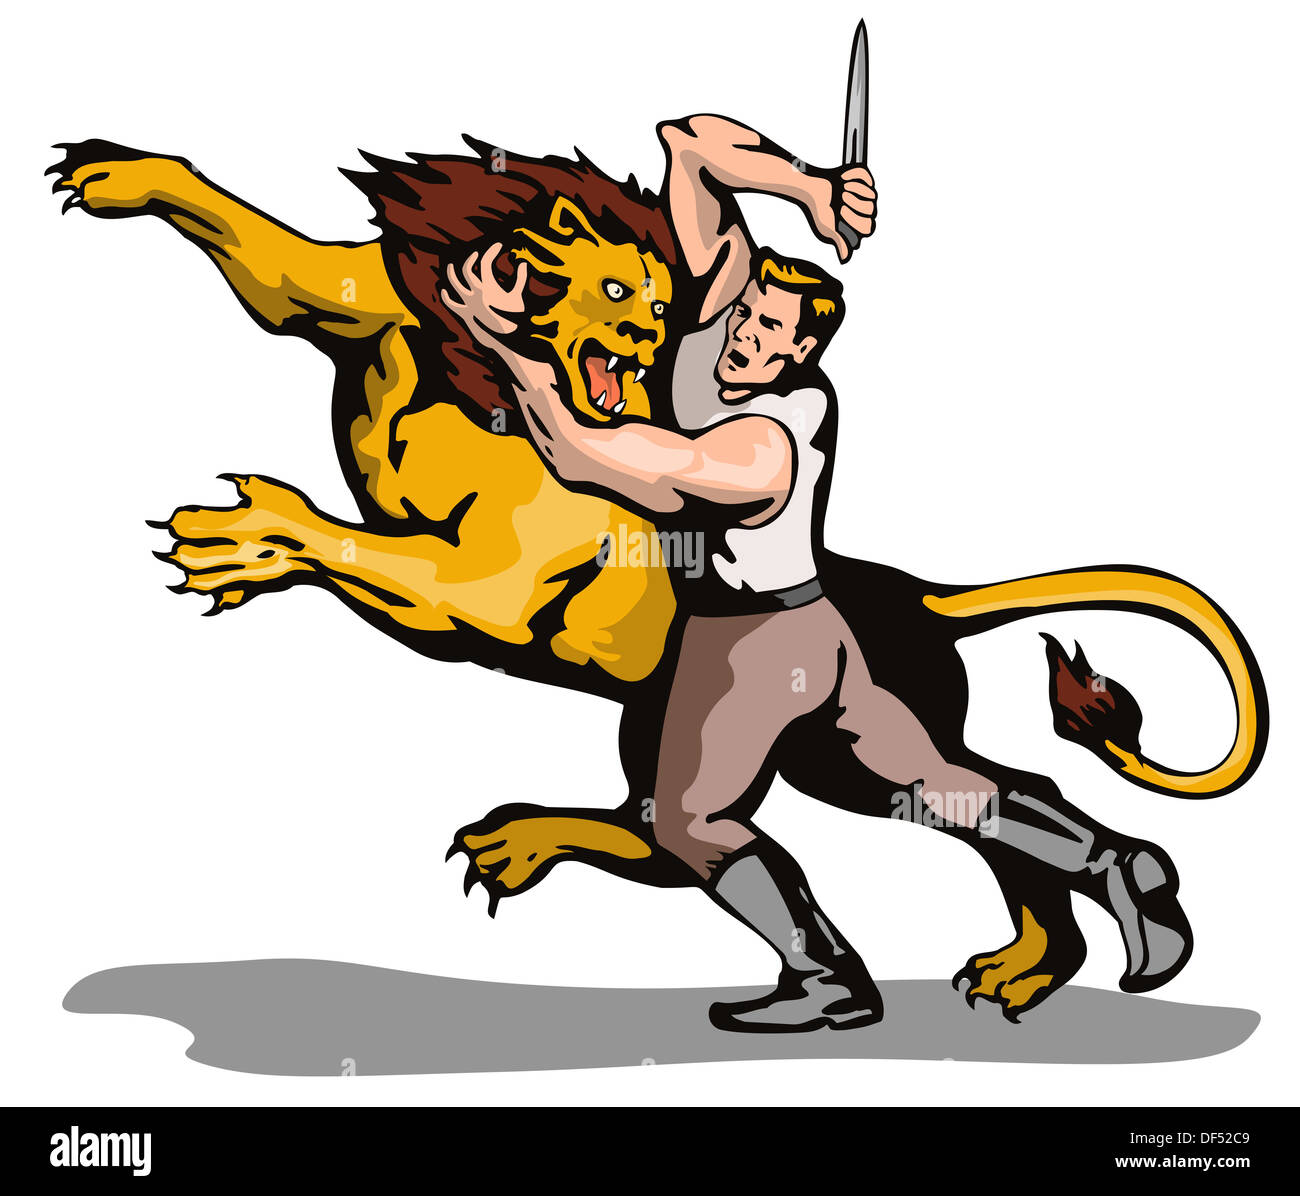 Illustration of a man with a knife fighting a lion isolated on white background done in retro style. Stock Photo